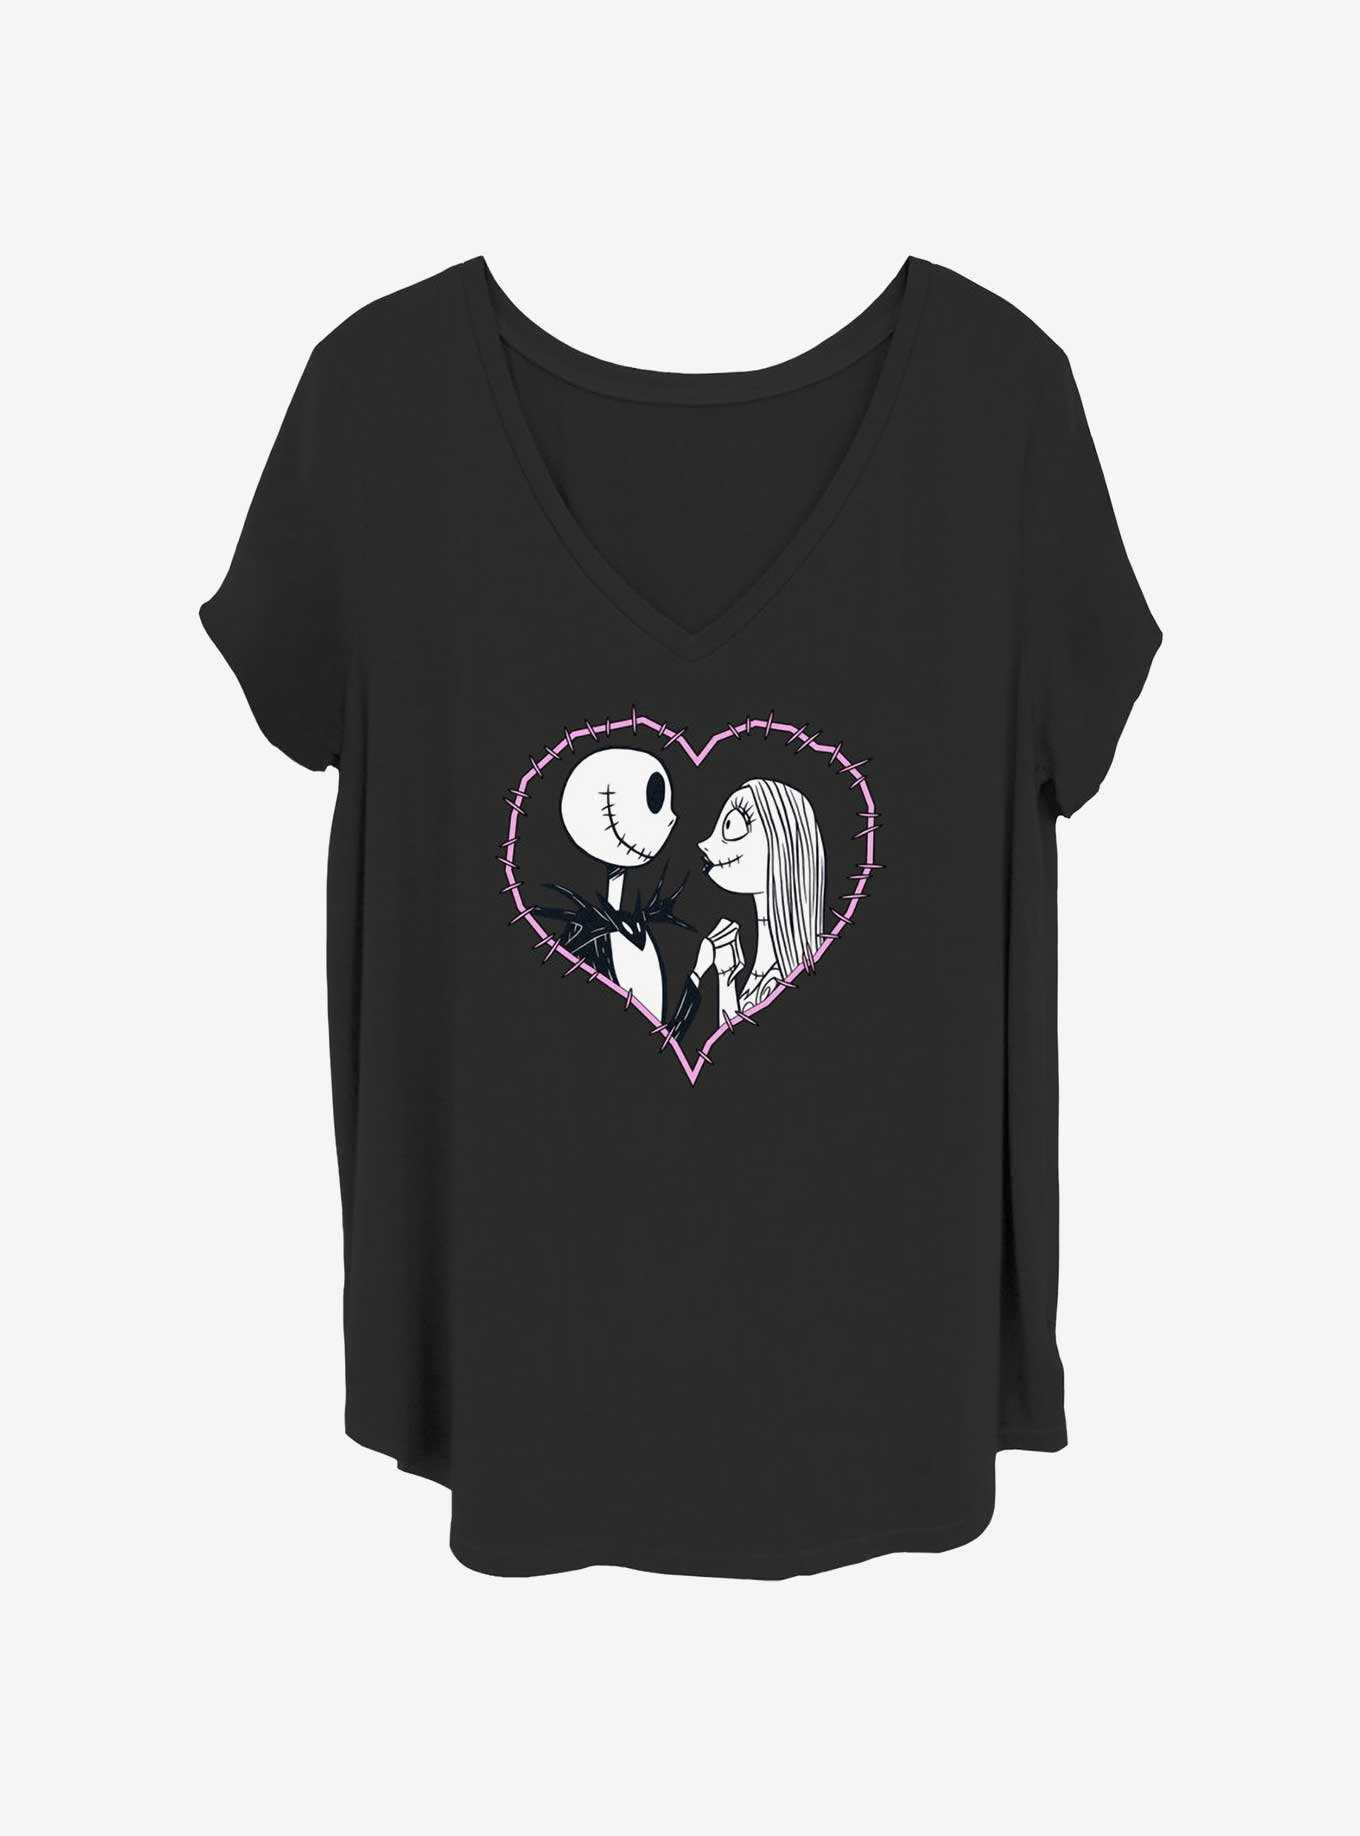 Disney The Nightmare Before Christmas Jack and Sally Heart Stitch Girls T-Shirt Plus Size, , hi-res